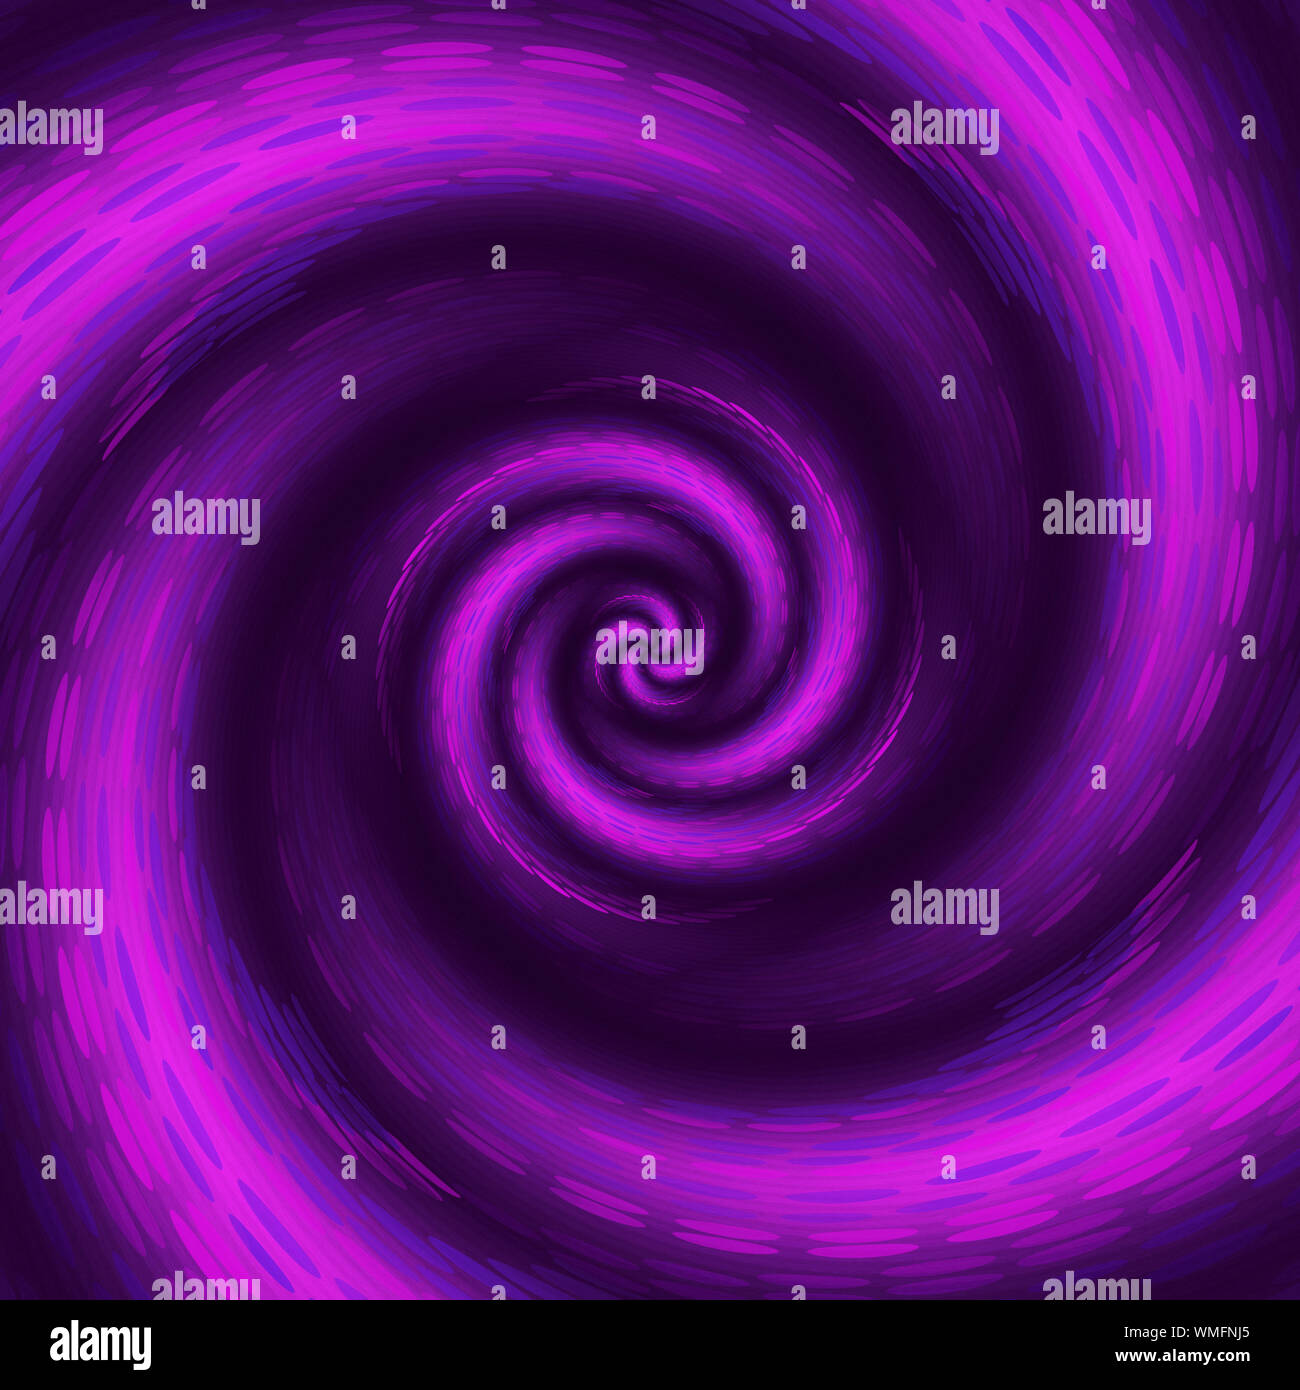 Abstract Spiral Kaleidoscope Of Purple Color Background Texture Stock Photo Alamy